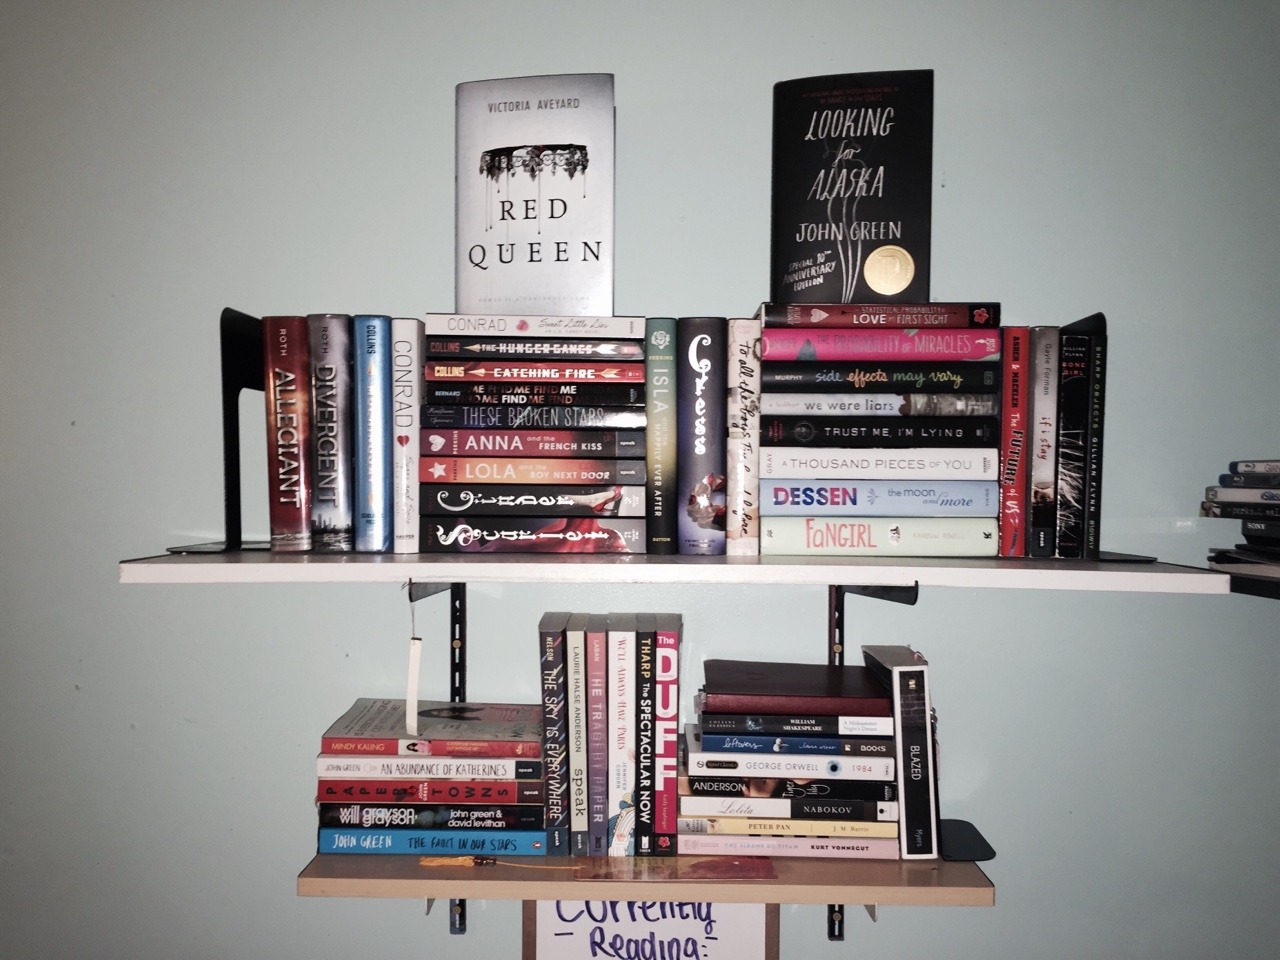 I ADORE my new book shelf set up. 
I didn&rsquo;t have a real spot for Red Queen nor LfA but they&rsquo;re probably my fav books that I own (though I have yet to read Red Queen) so it&rsquo;s fitting that they get they&rsquo;re own lovely spots.